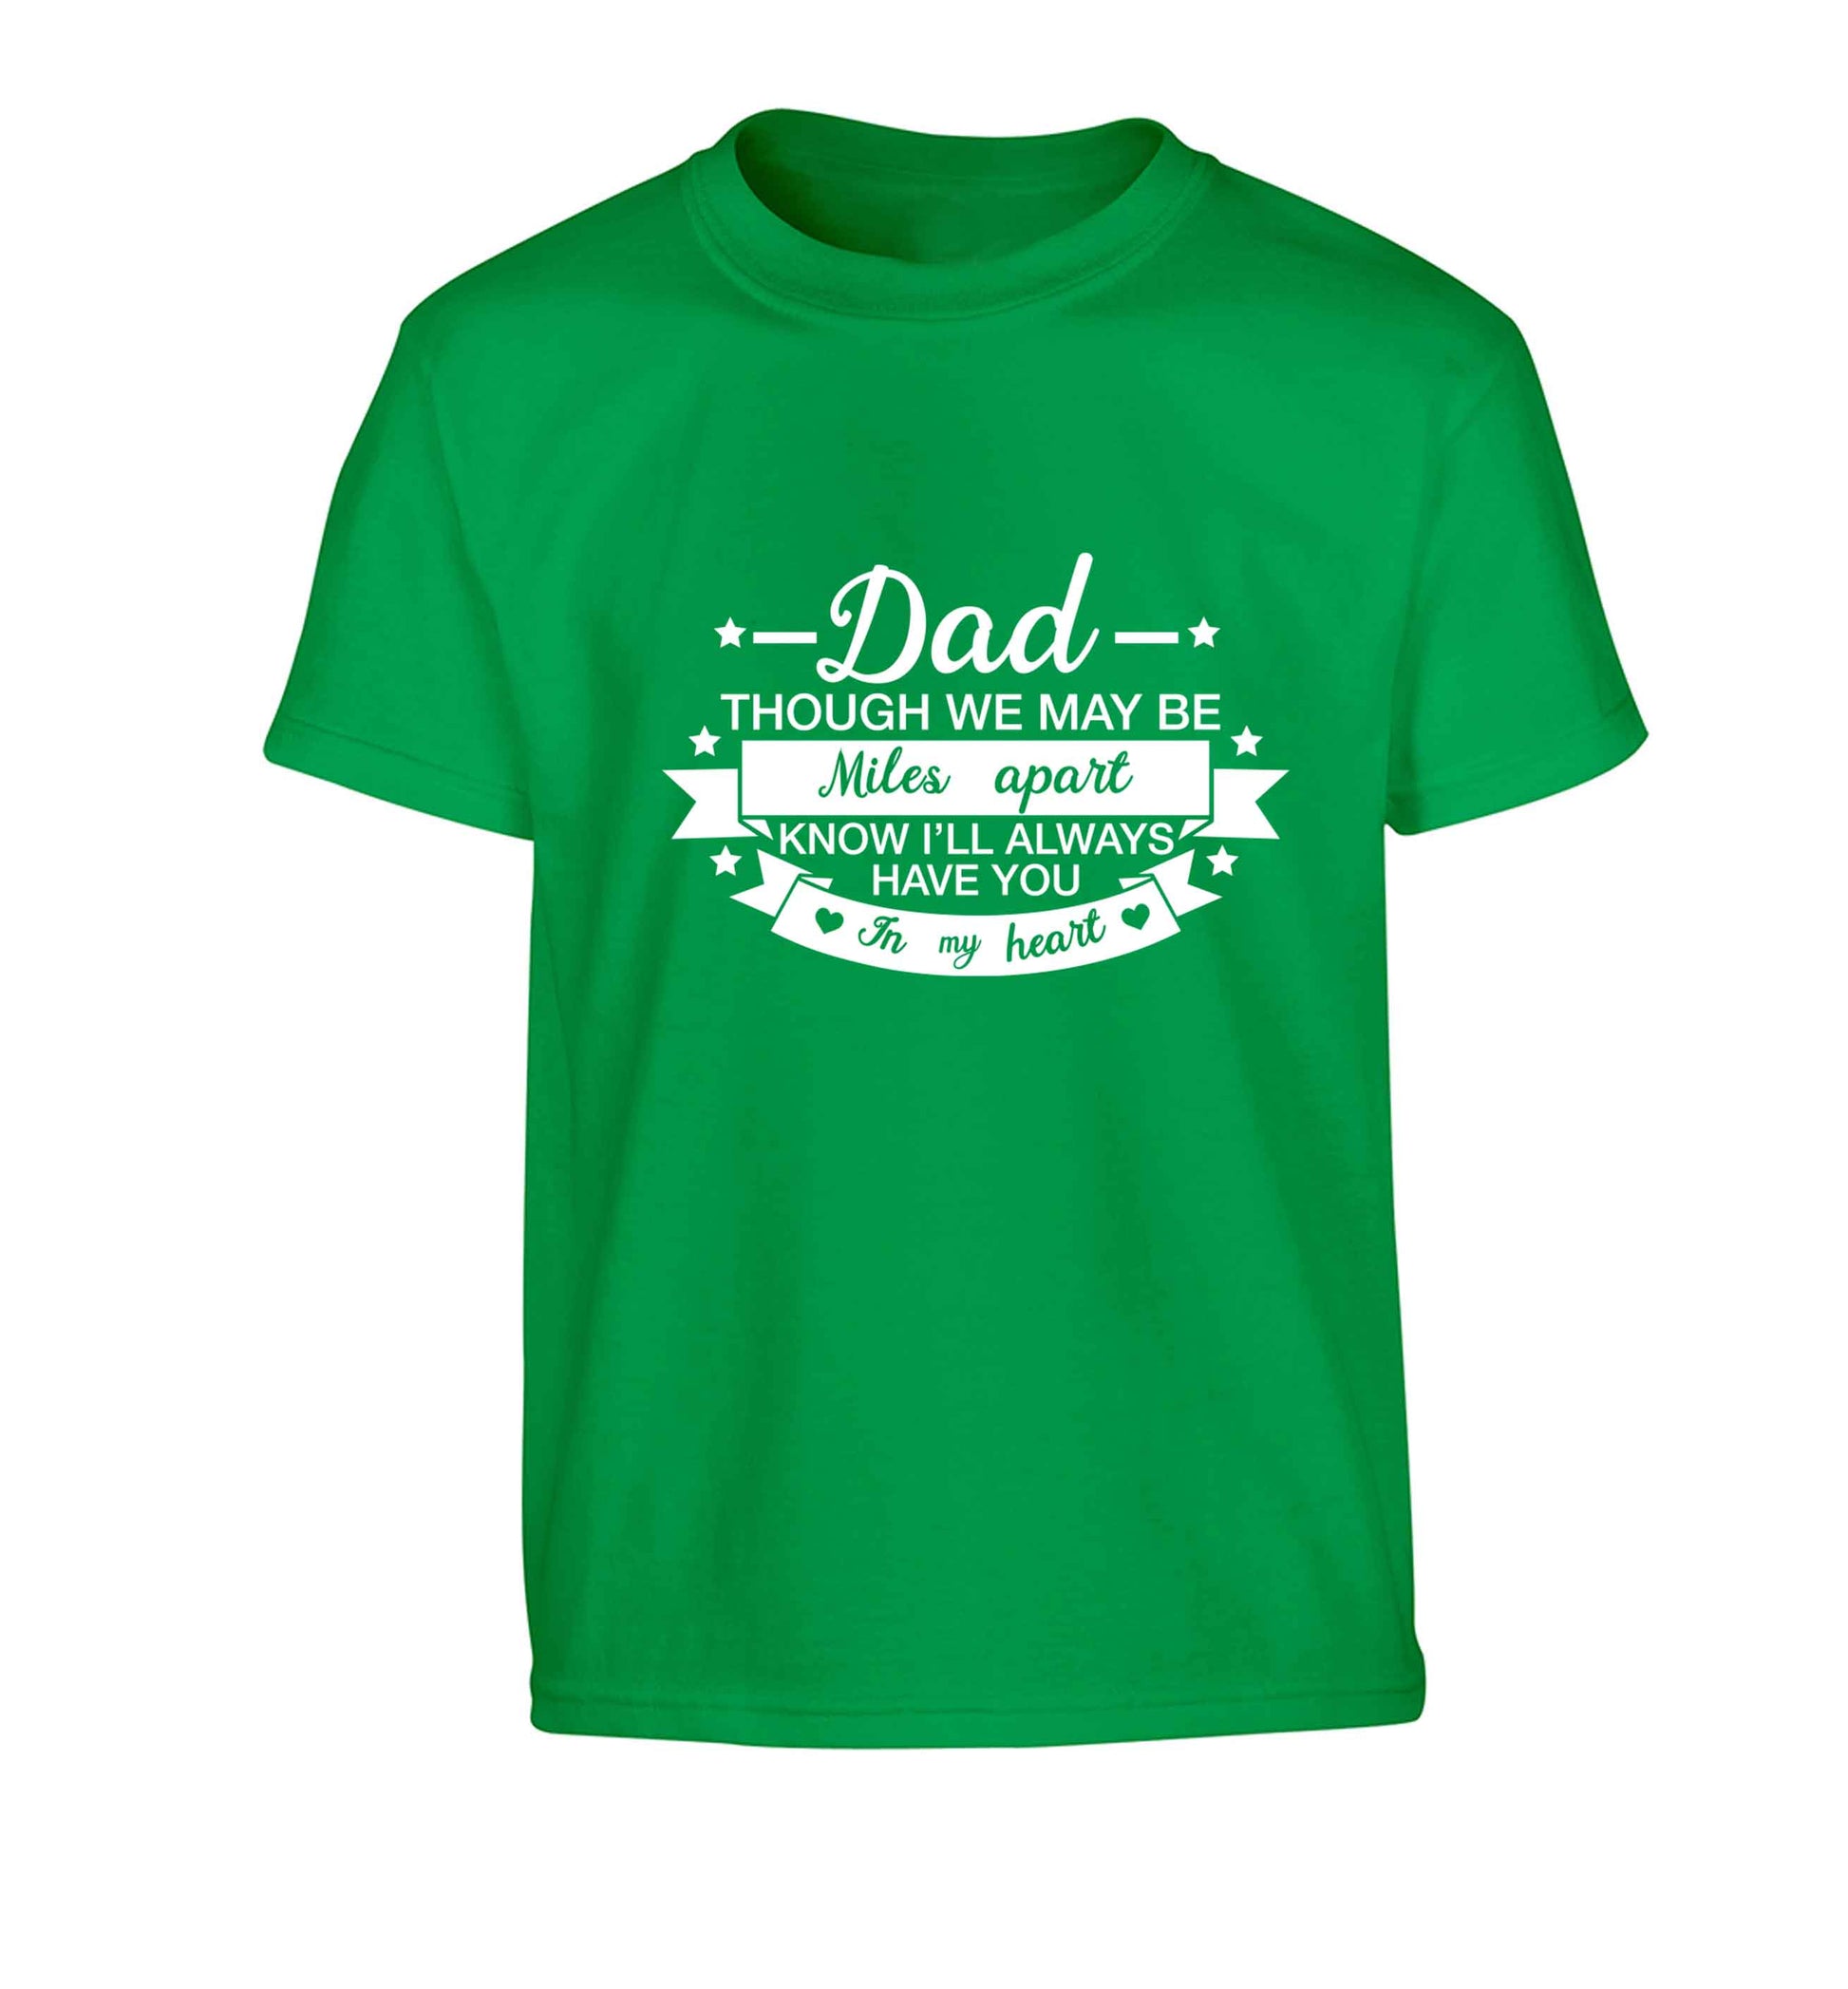 Dad though we are miles apart know I'll always have you in my heart Children's green Tshirt 12-13 Years